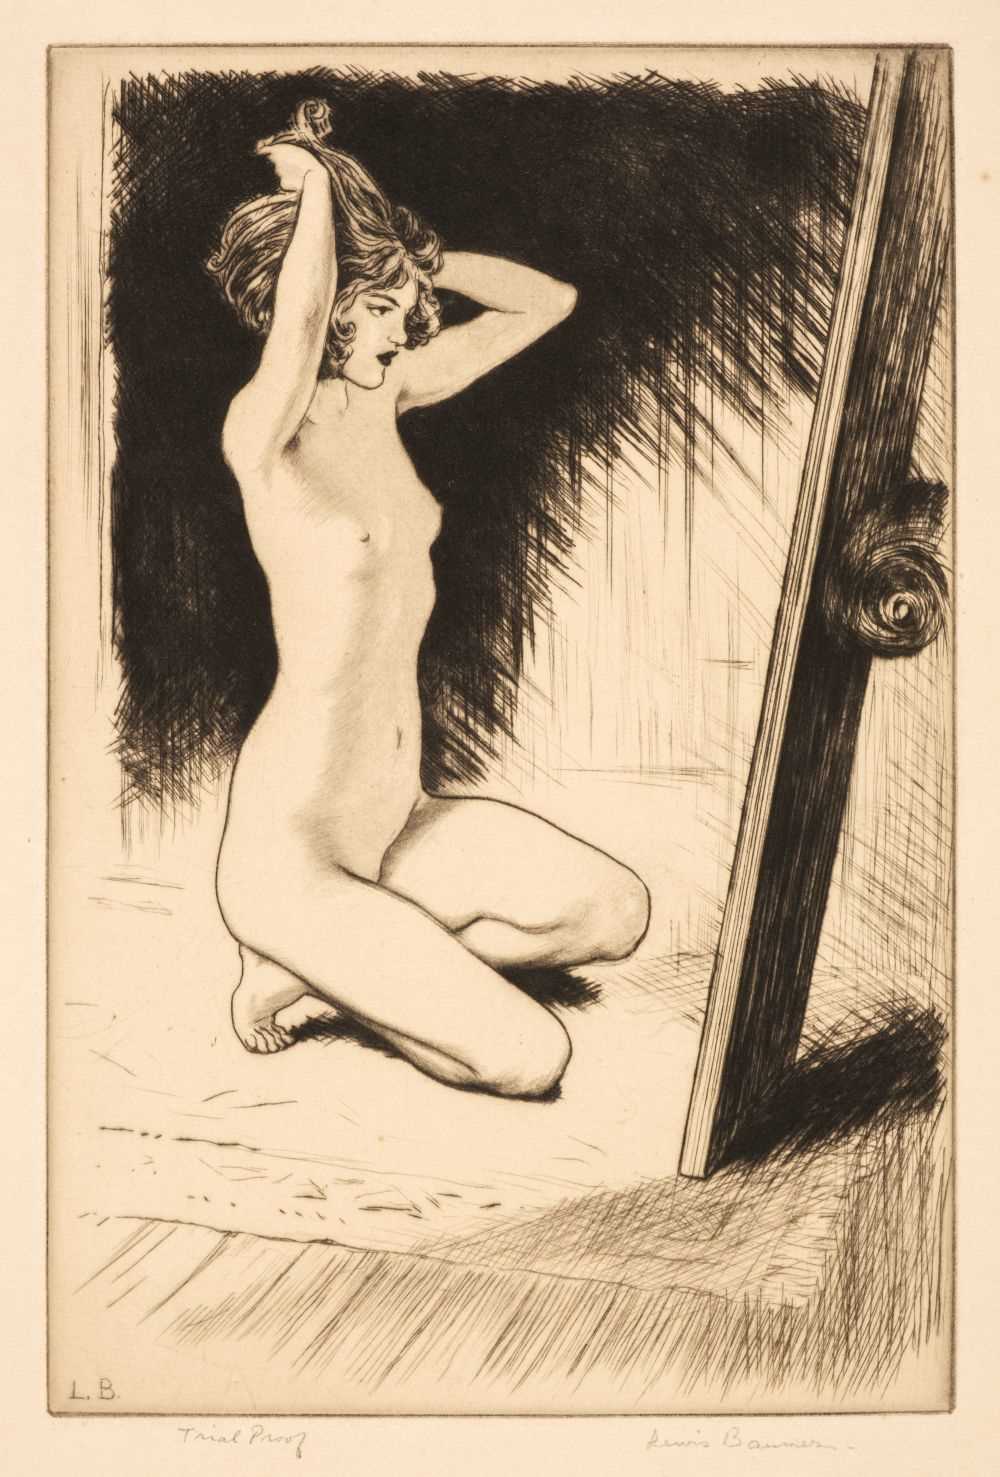 Lot 402 - Baumer (Lewis, 1870-1963). Nude before a Mirror, 1920s